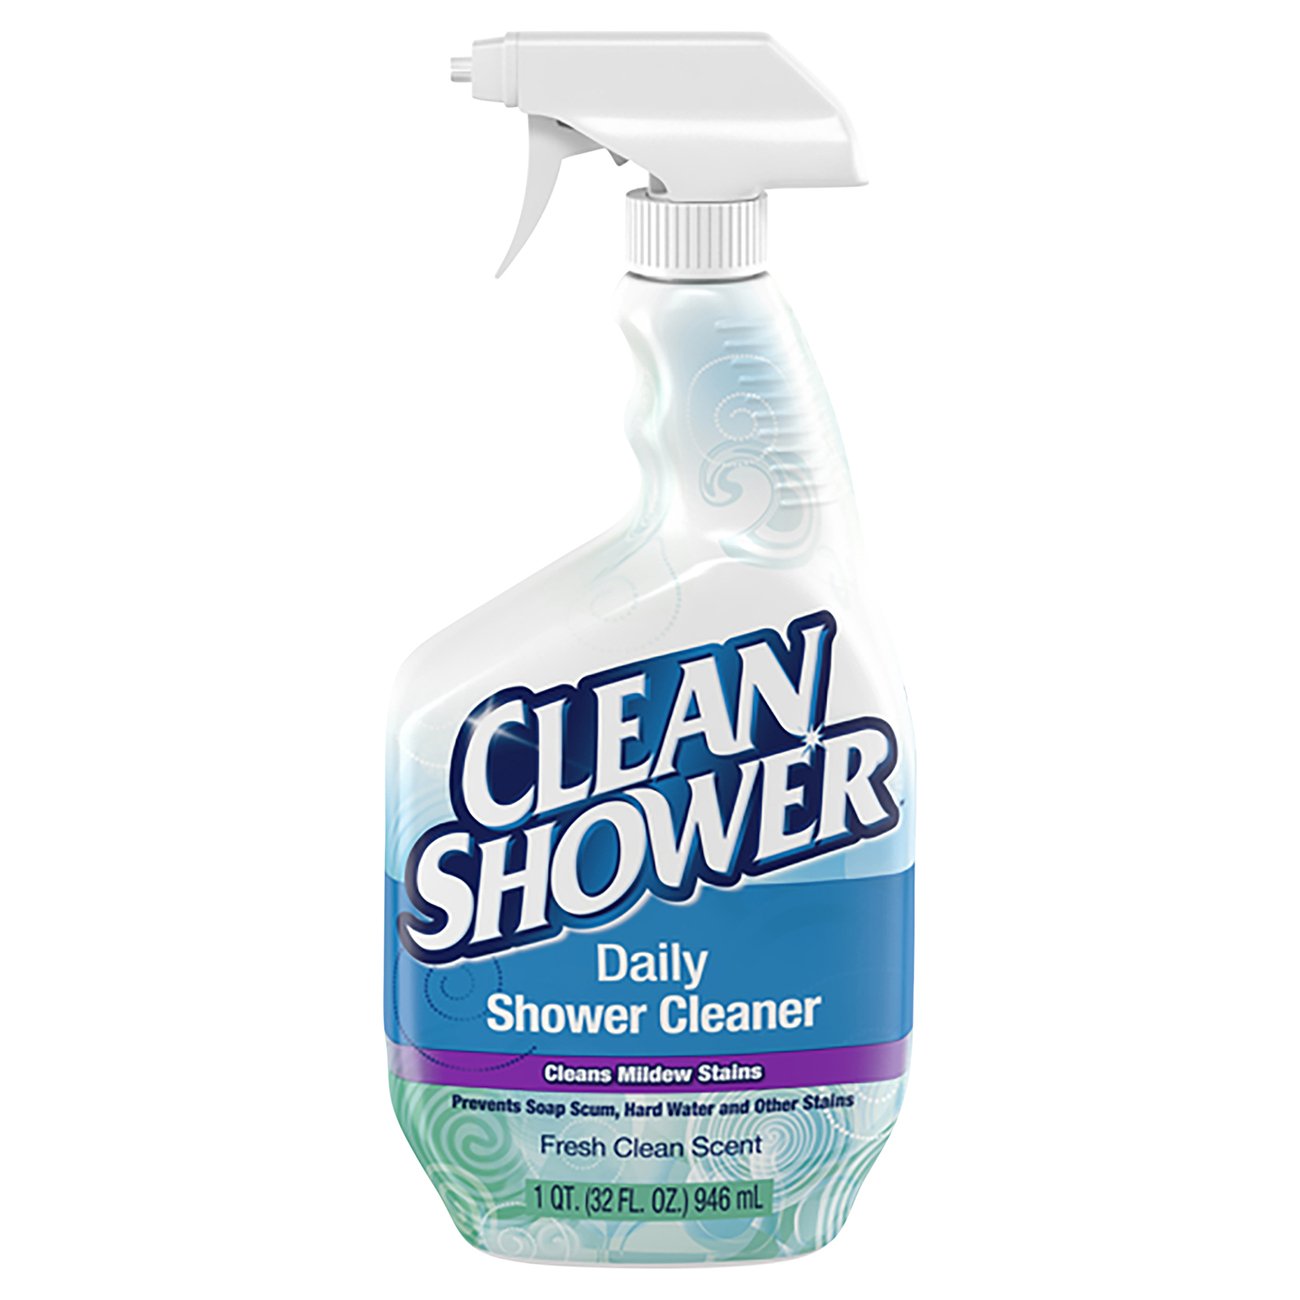 Homemade Daily Shower Cleaner Spray - Removes Soap Scum - Mom 4 Real